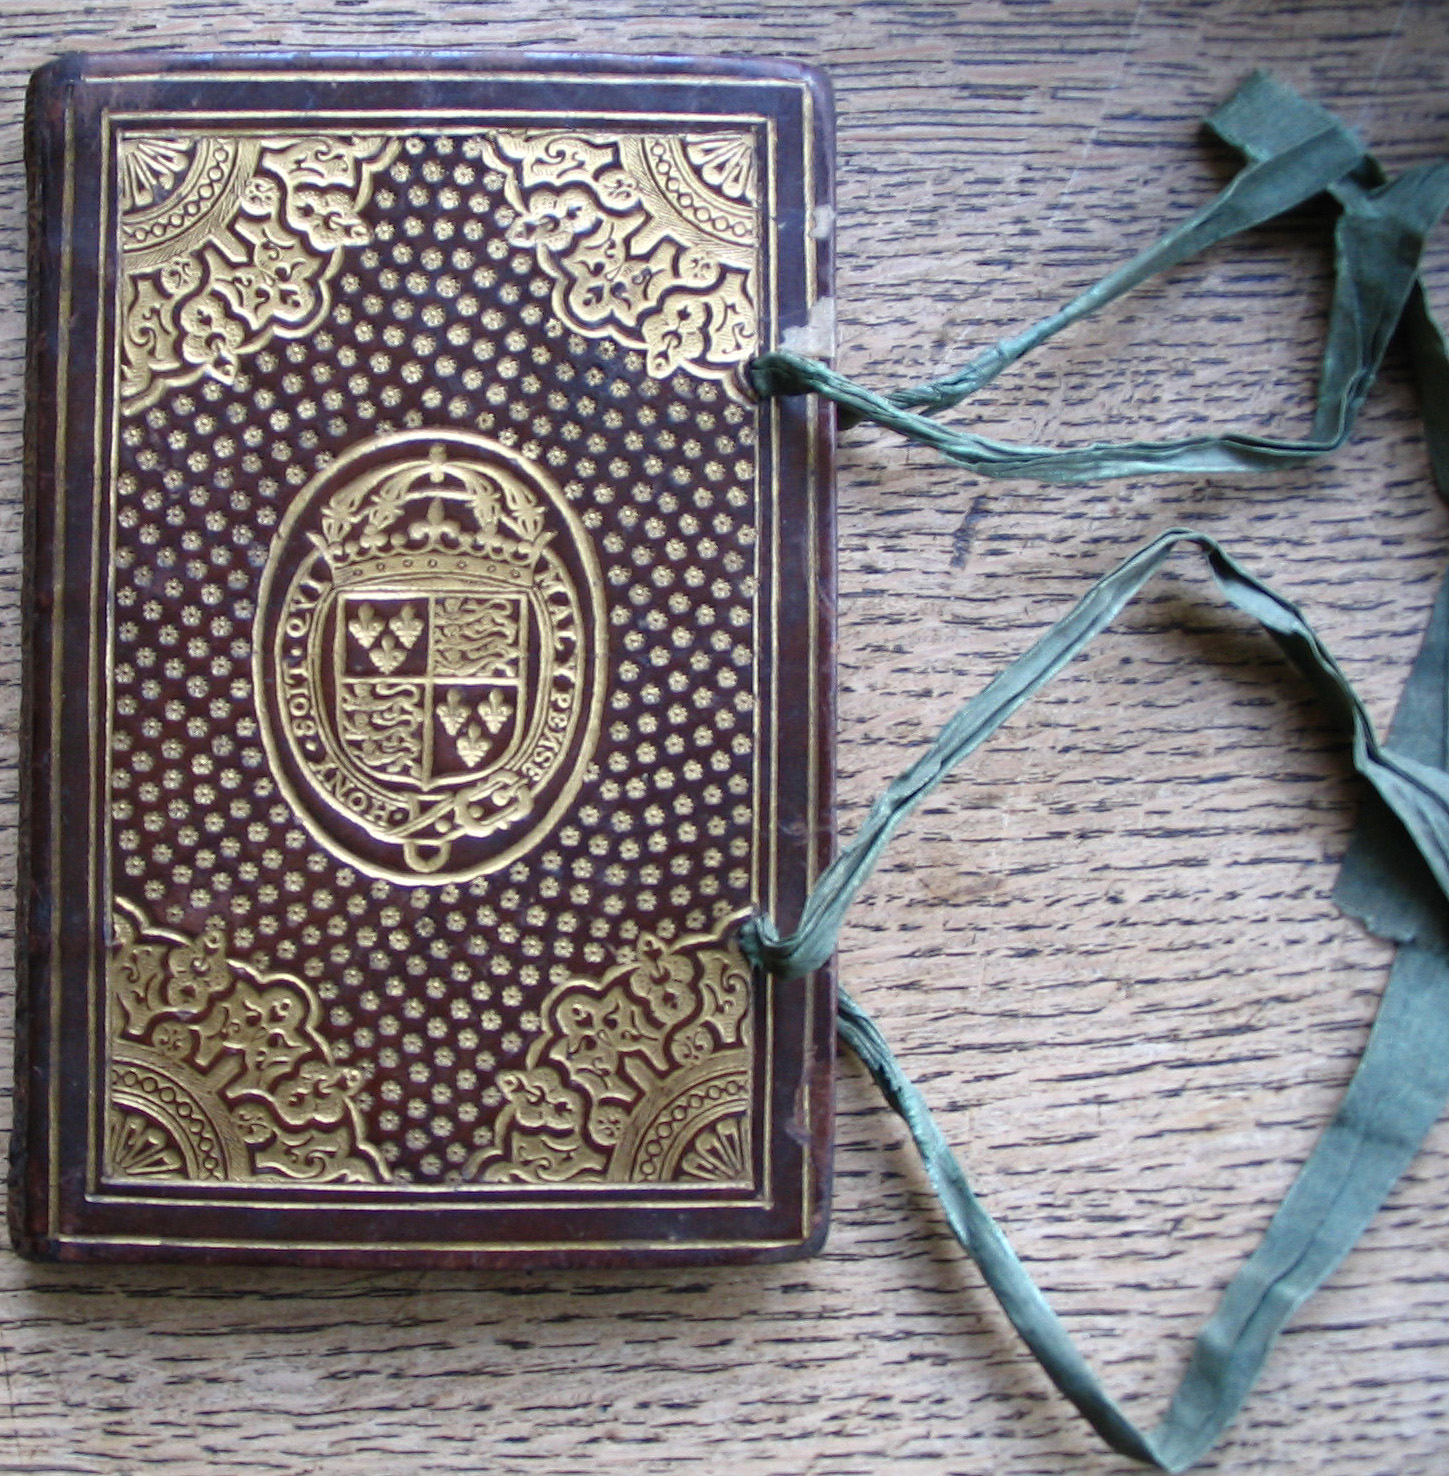 A small book, in an ornate red and gold binding, with turquoise ribbons.